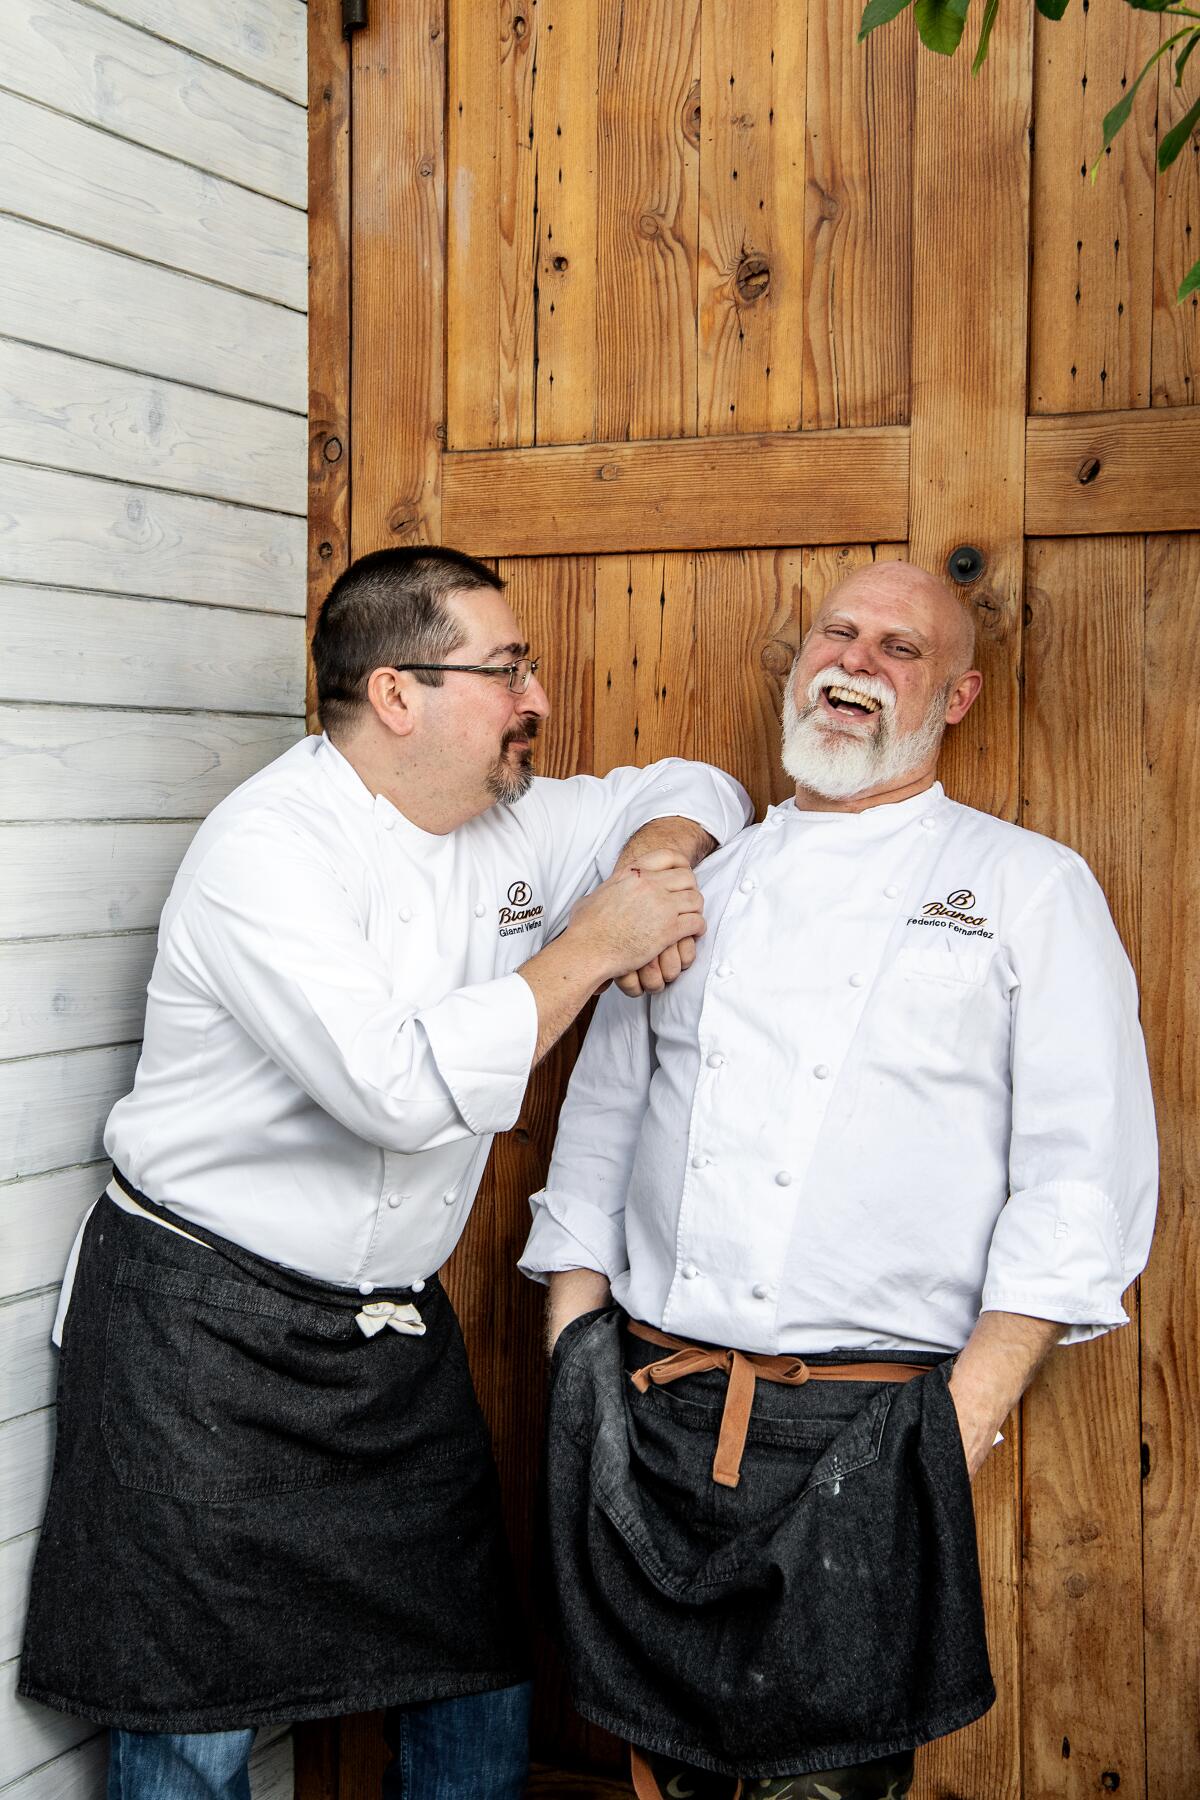 Bianca Bakery co-owners Gianni Vietina, left, and Federico Fernandez.